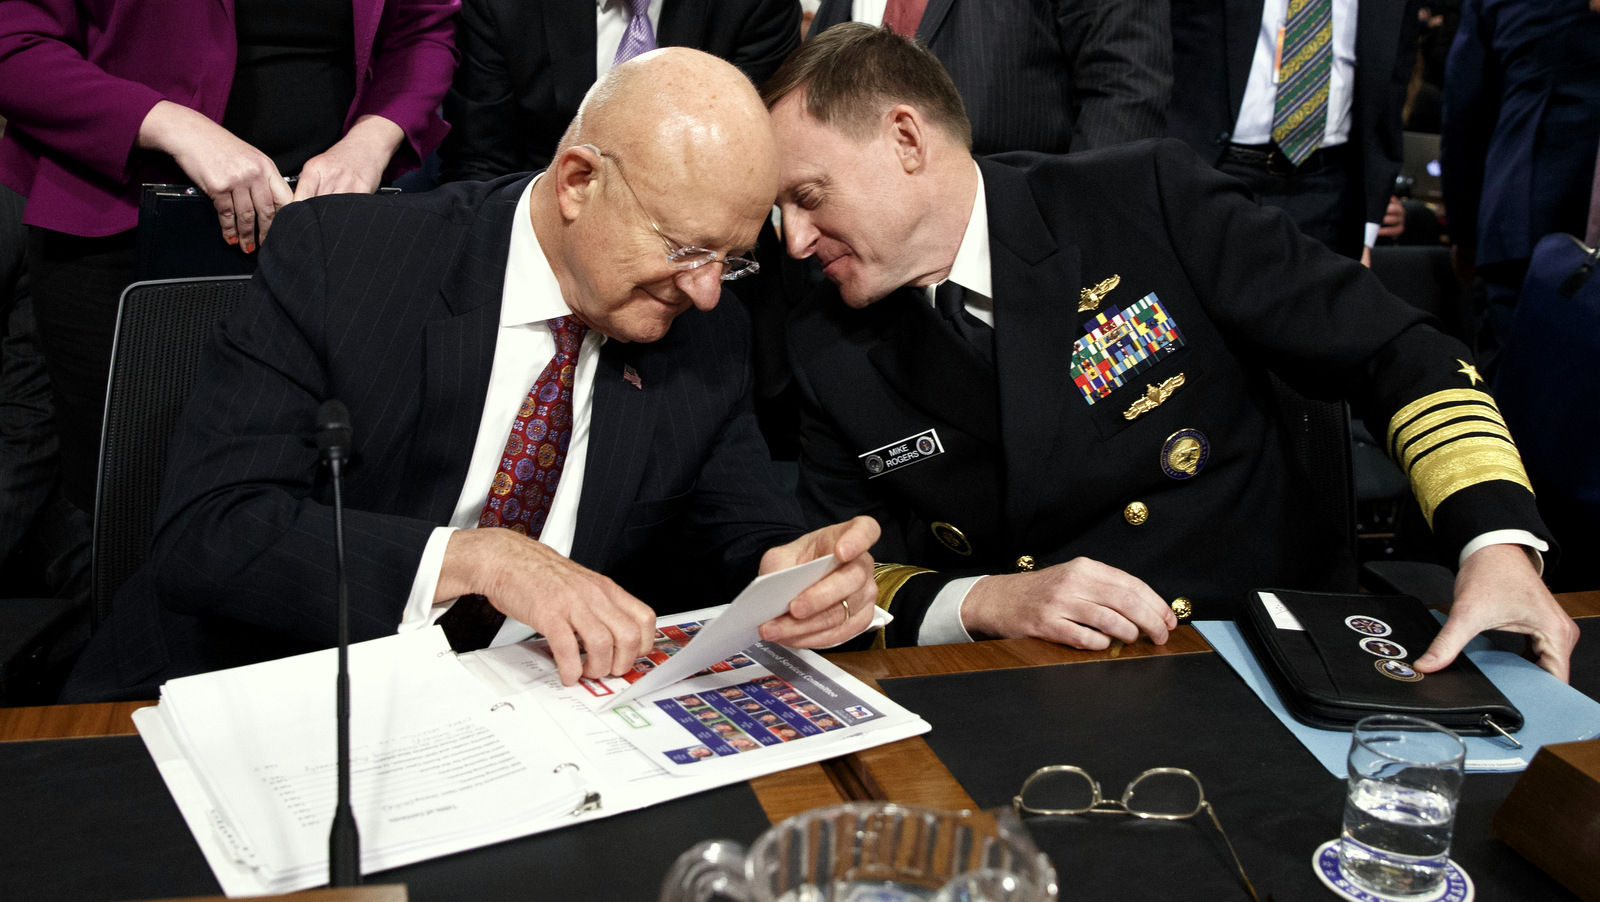 Director of National Intelligence James Clapper, left, talks with National Security Agency and Cyber Command chief Adm. Michael Rogers on Capitol Hill in Washington, Thursday, Jan. 5, 2017, at the conclusion of a Senate Armed Services Committee hearing: "Foreign Cyber Threats to the United States." (AP/Evan Vucci)